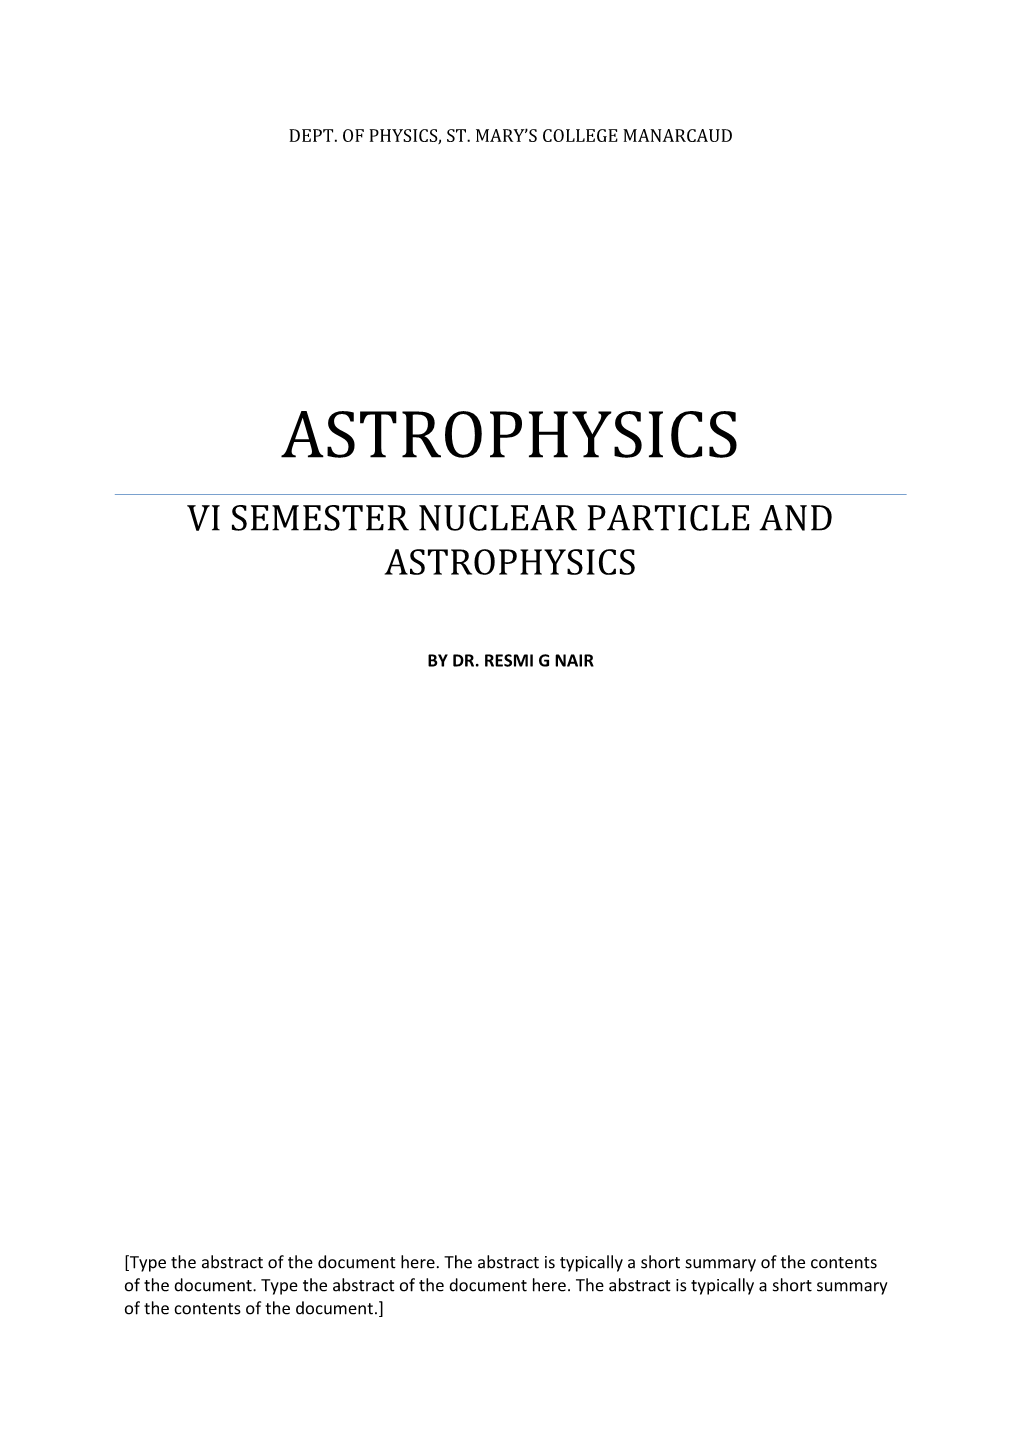 Astrophysics Vi Semester Nuclear Particle and Astrophysics